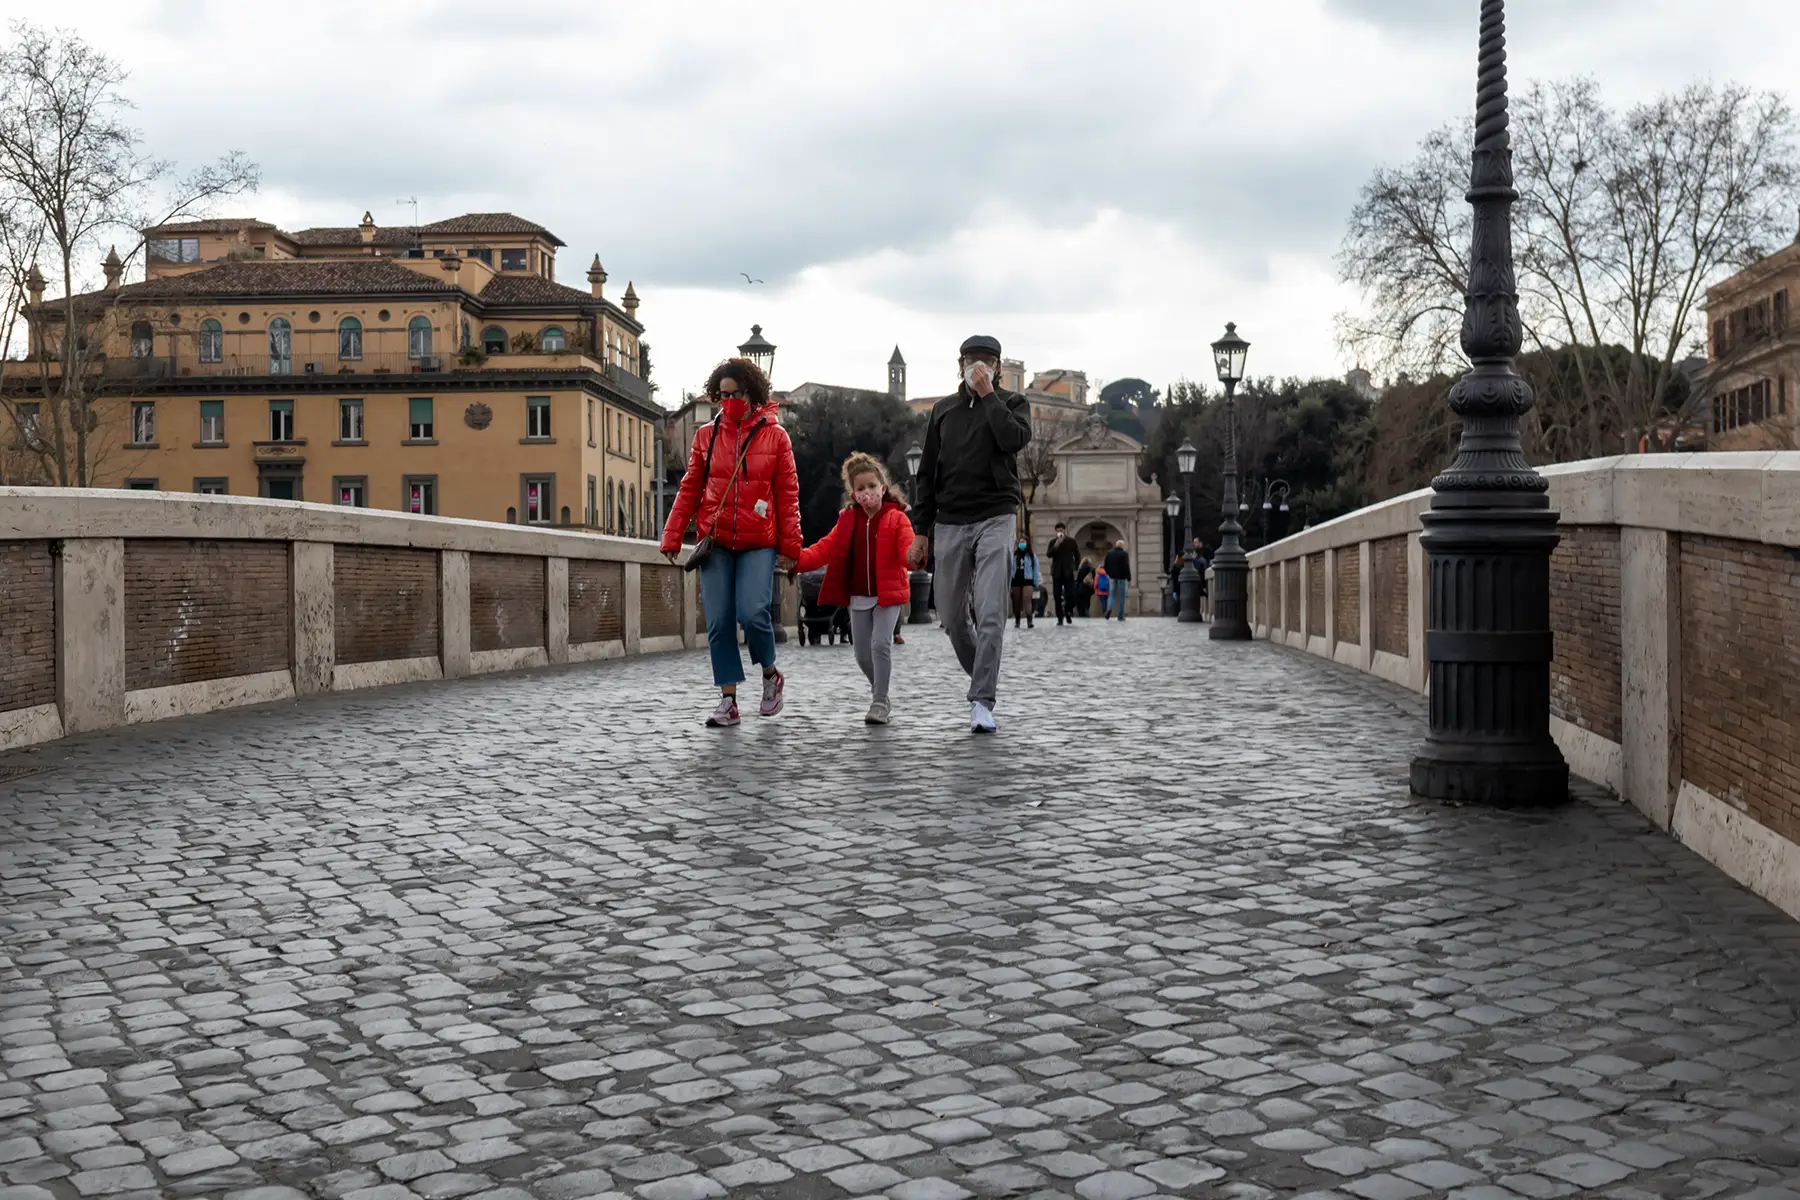 A family walking across a cobbled bridge on a cloudy day, wearing face masks.